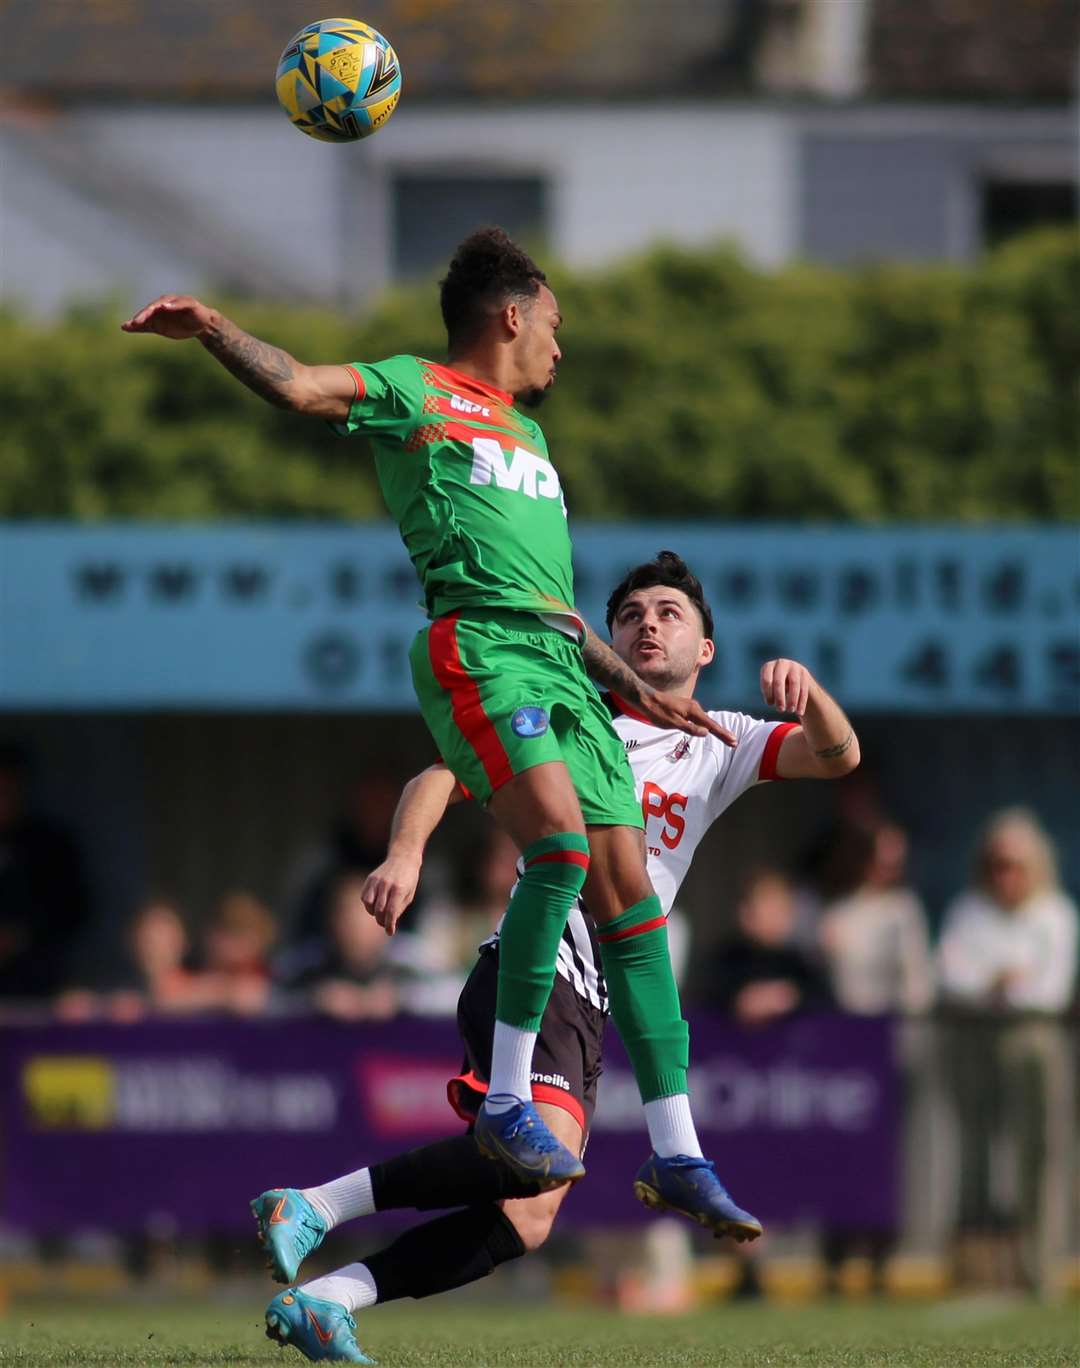 Troy Howard, of Lydd, jumps high as Deal defender Jack Penny pays close attention during the Lyddders’ 3-1 weekend defeat. Picture: Paul Willmott